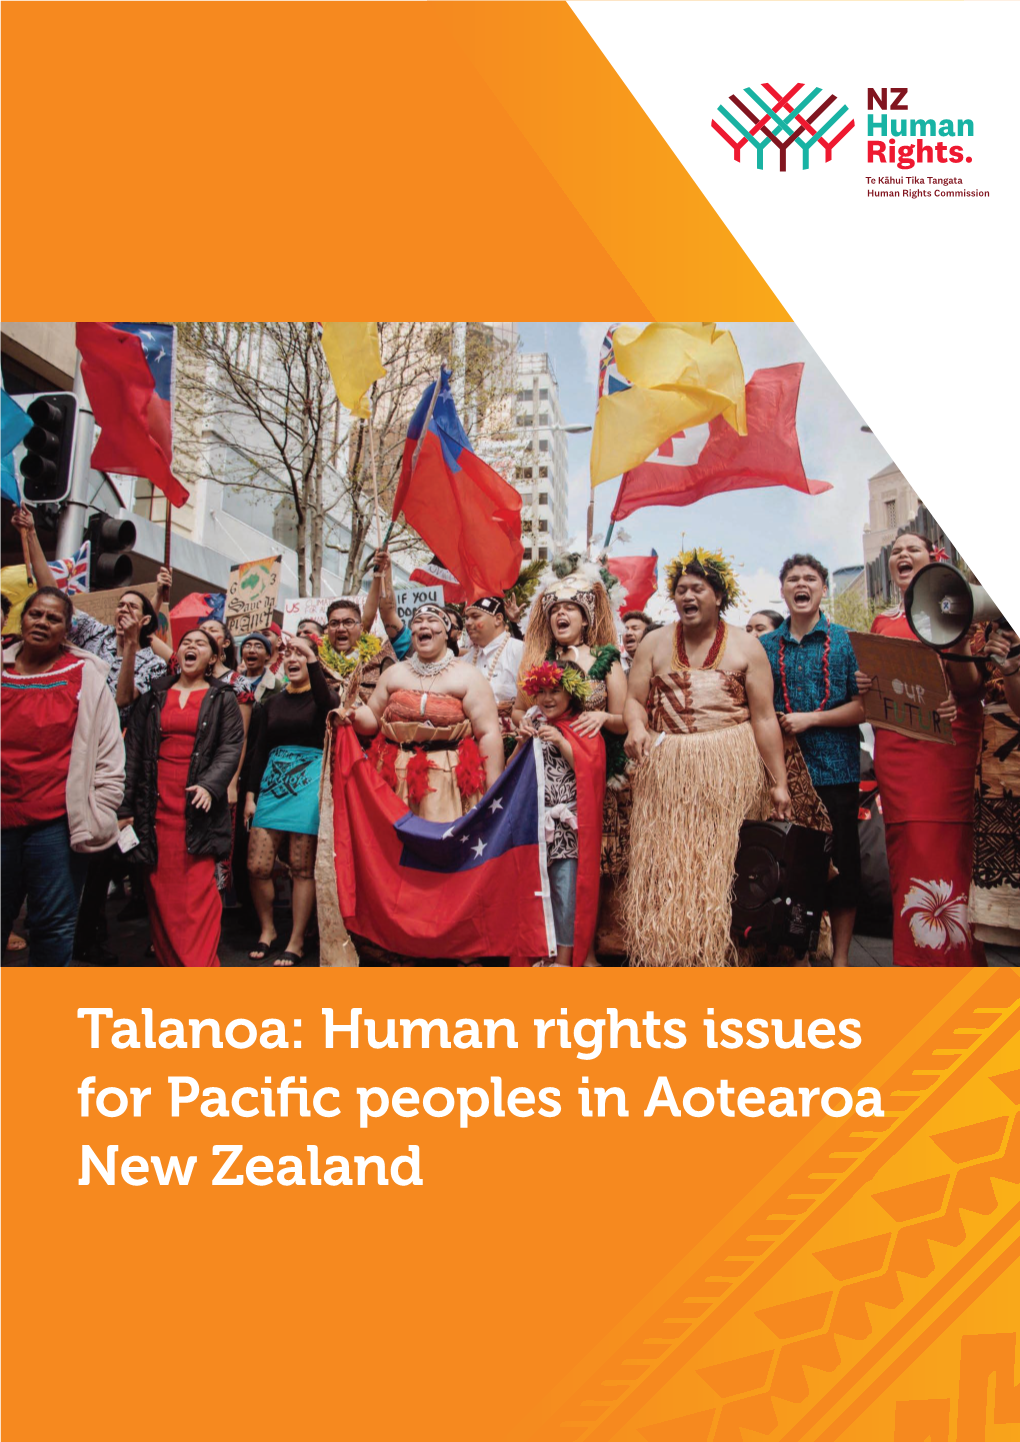 Talanoa: Human Rights Issues for Pacific Peoples in Aotearoa New Zealand ISBN: 978-0-478-35612-0 Online: 978-0-478-35613-7